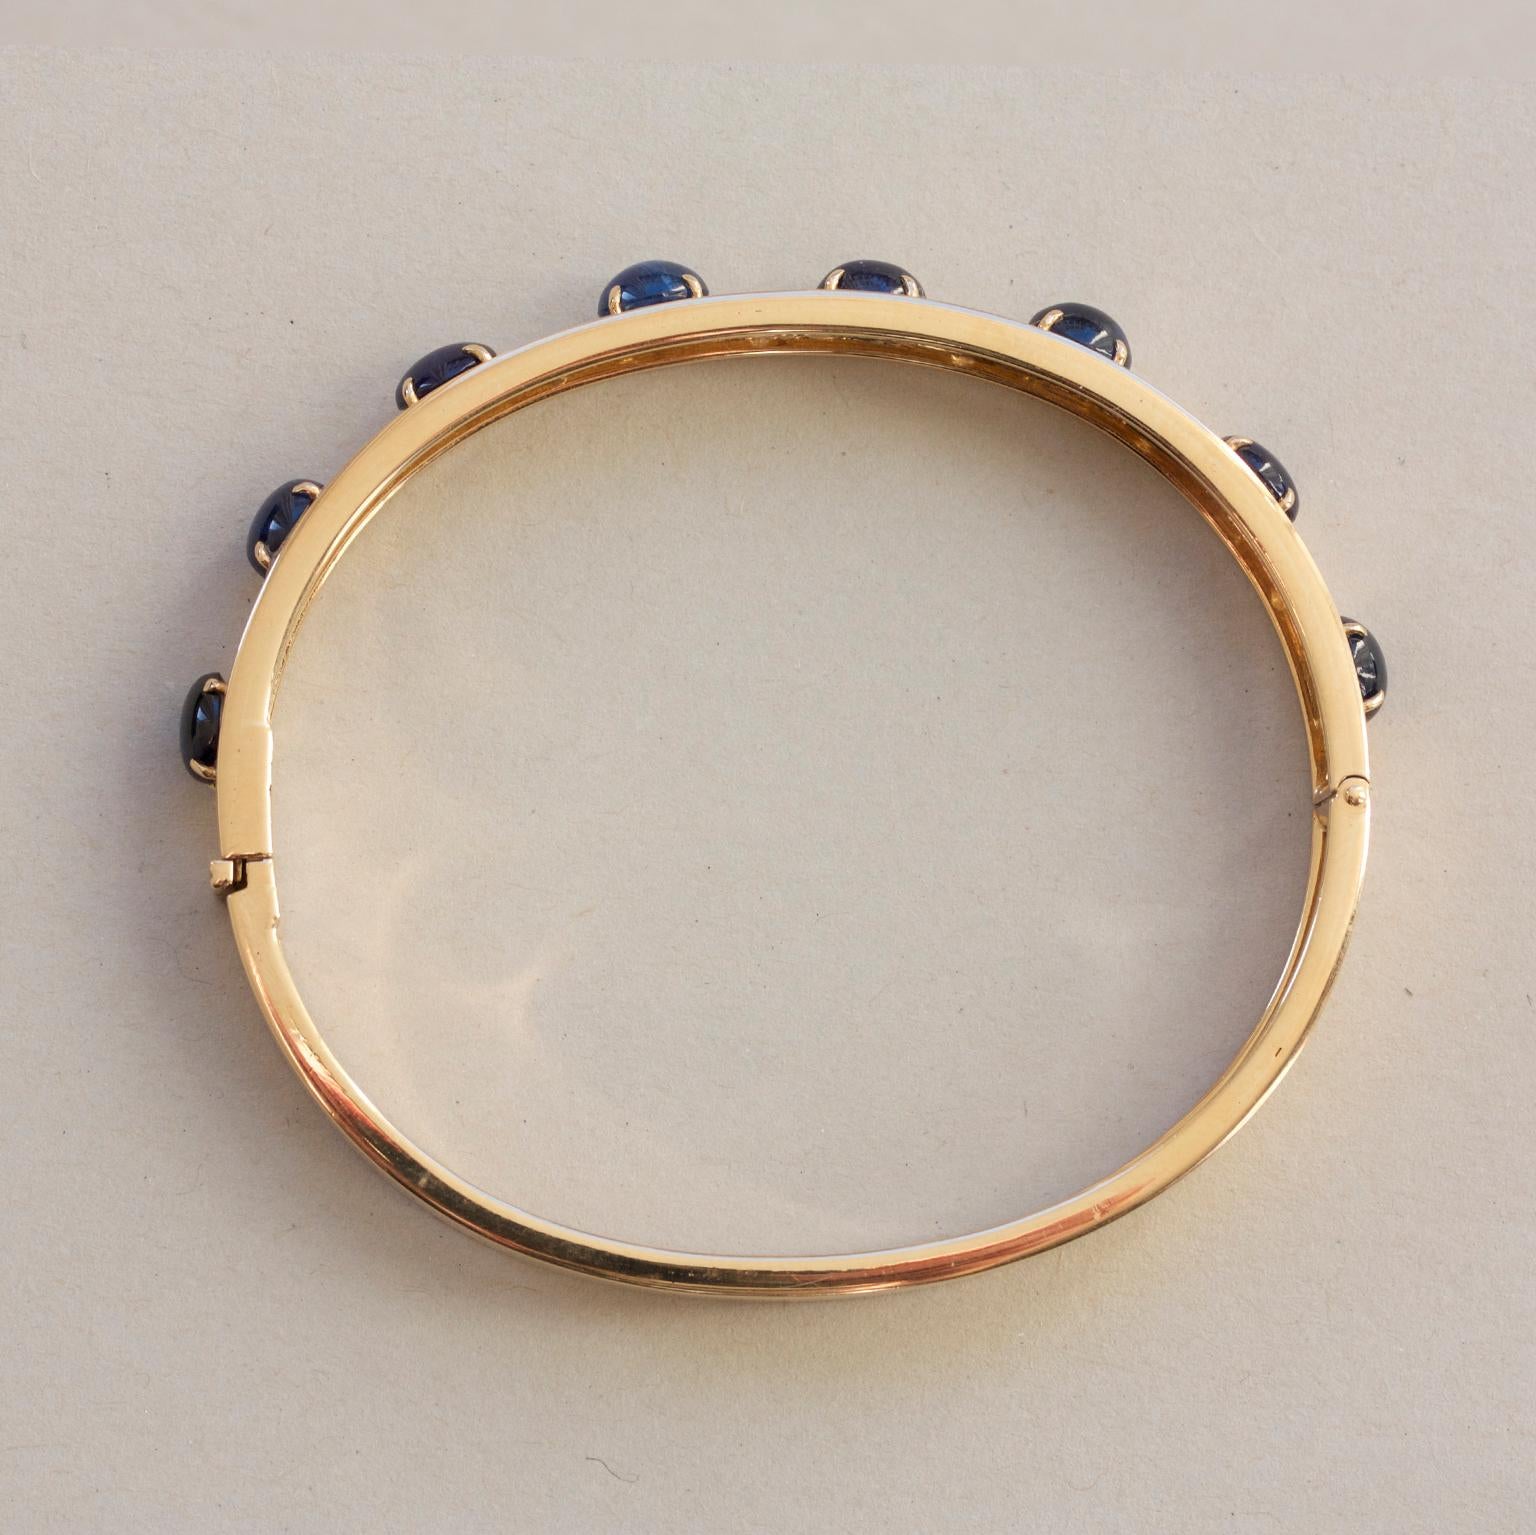 Women's or Men's 18 Carat Gold Bangle with Diamonds and Sapphires